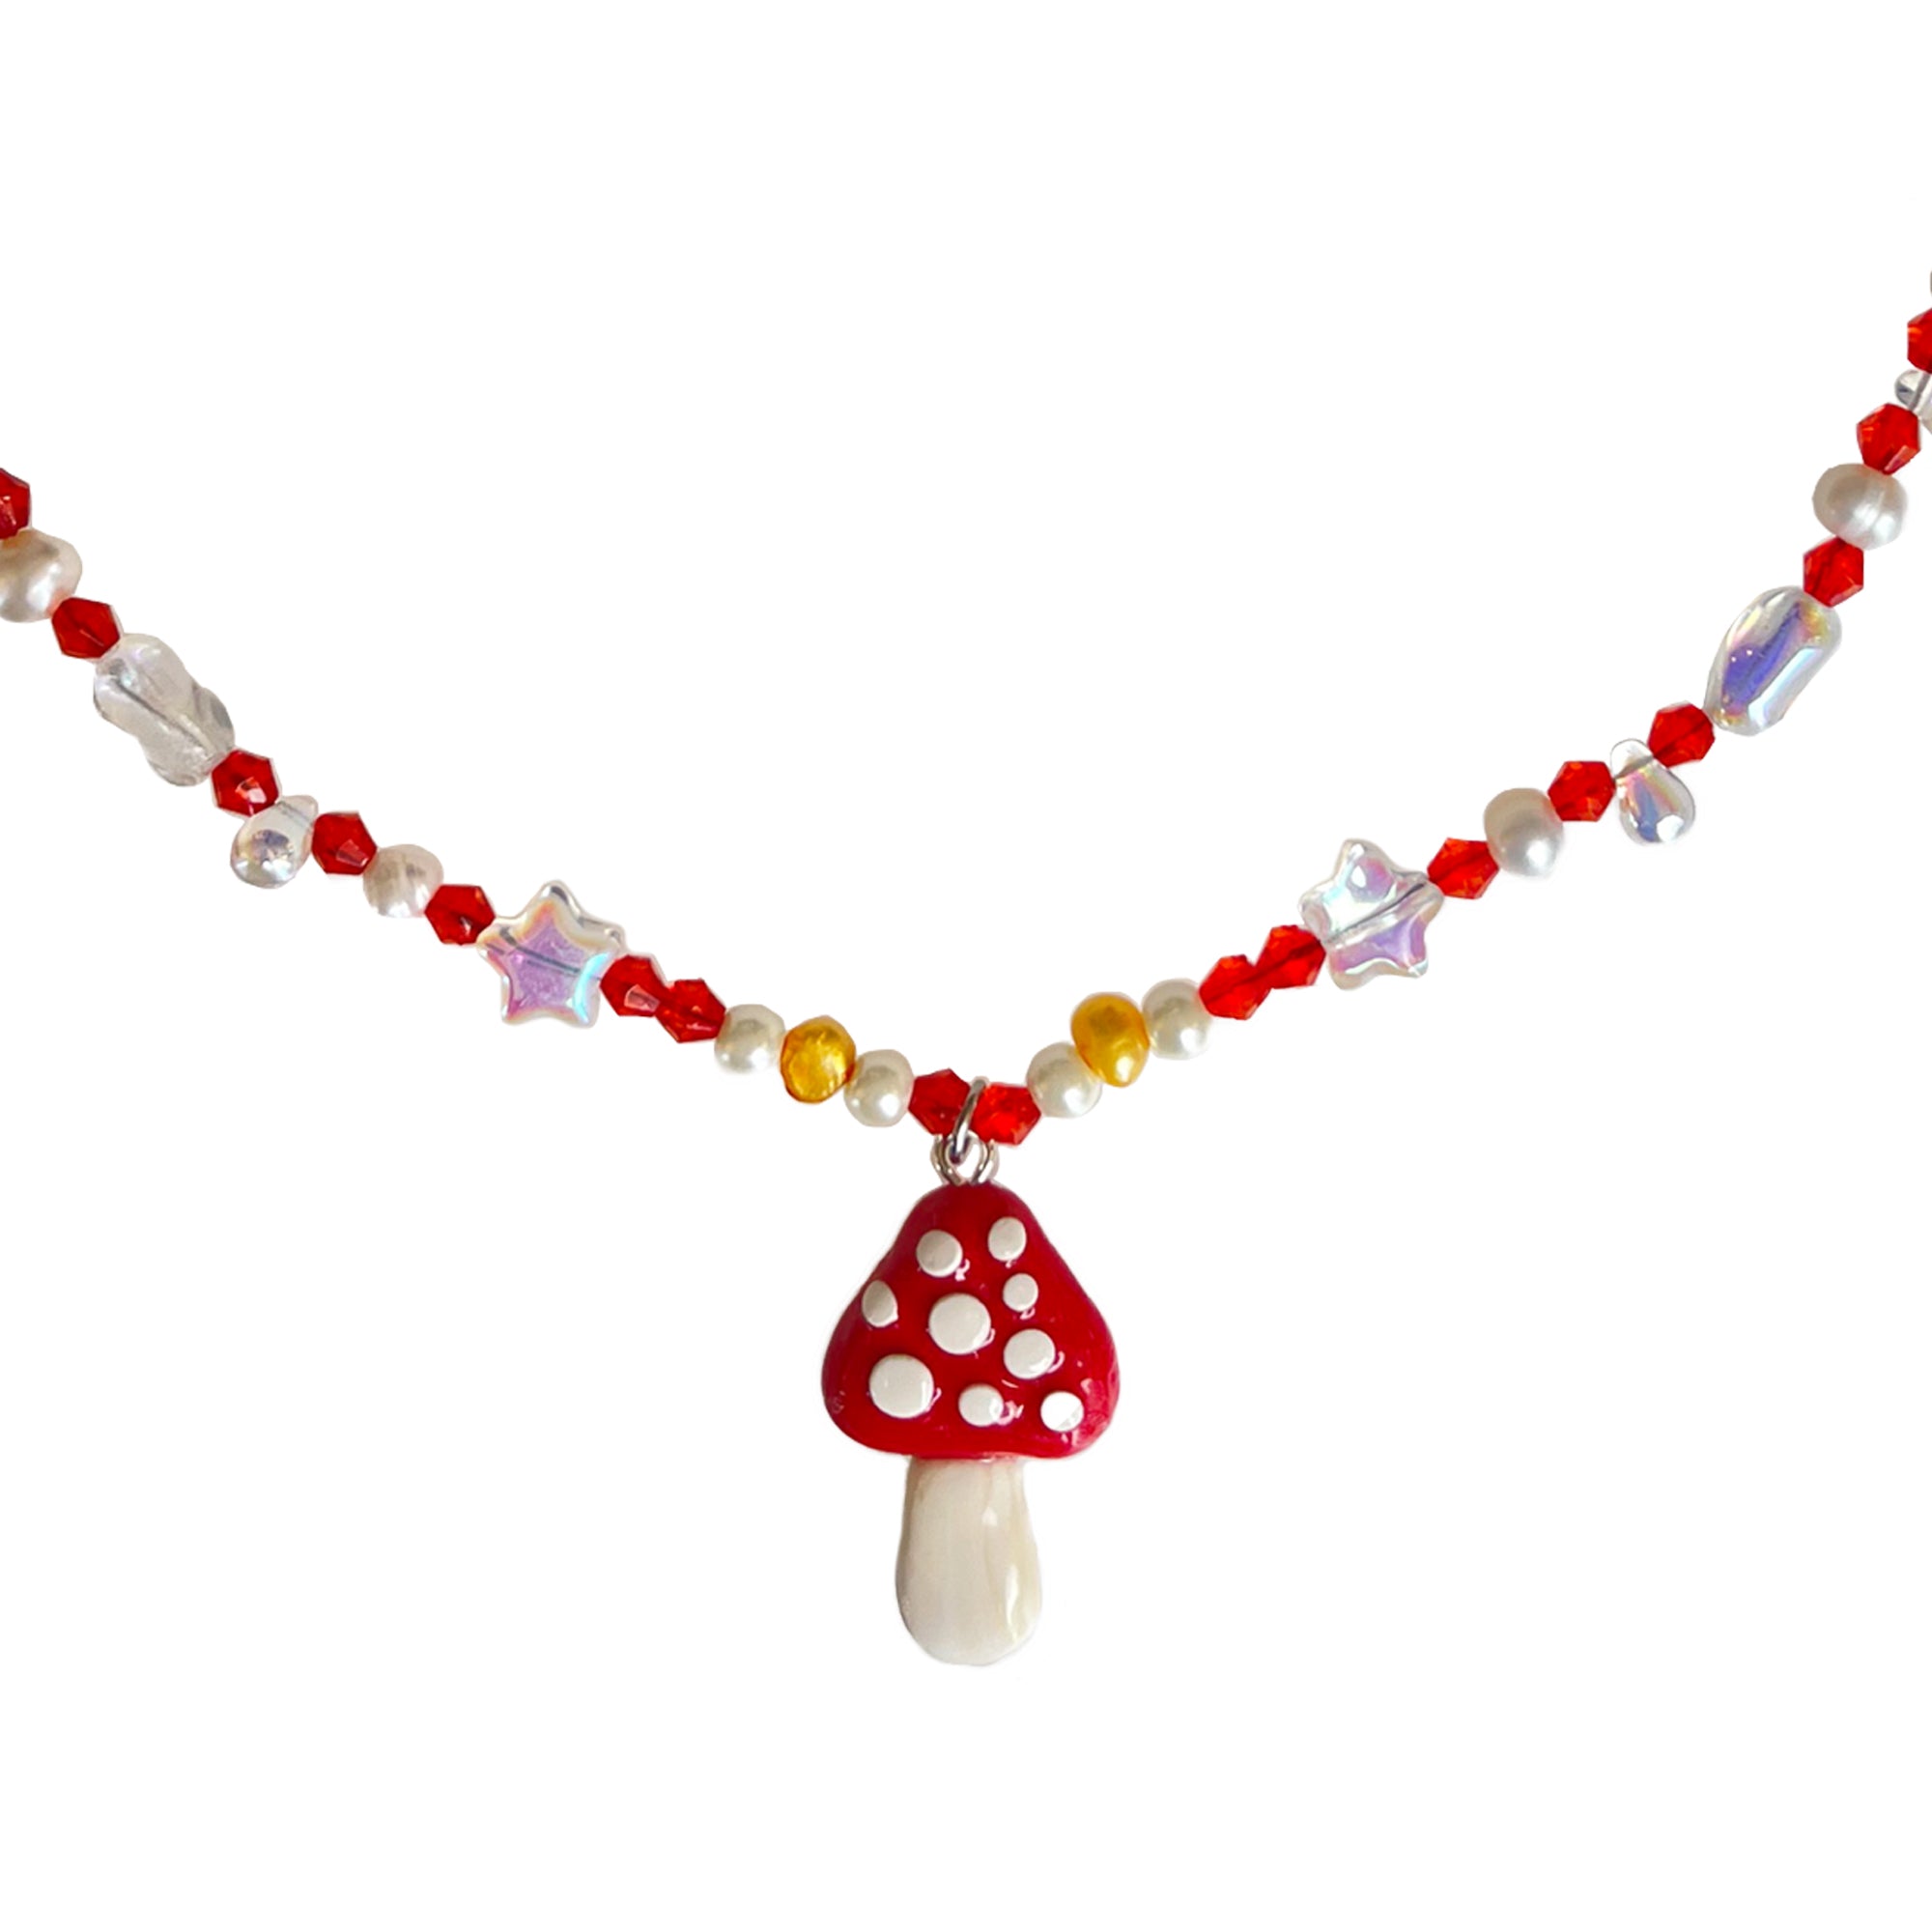 Beaded Mushroom Necklace 🍄 Colorful necklace with... - Depop